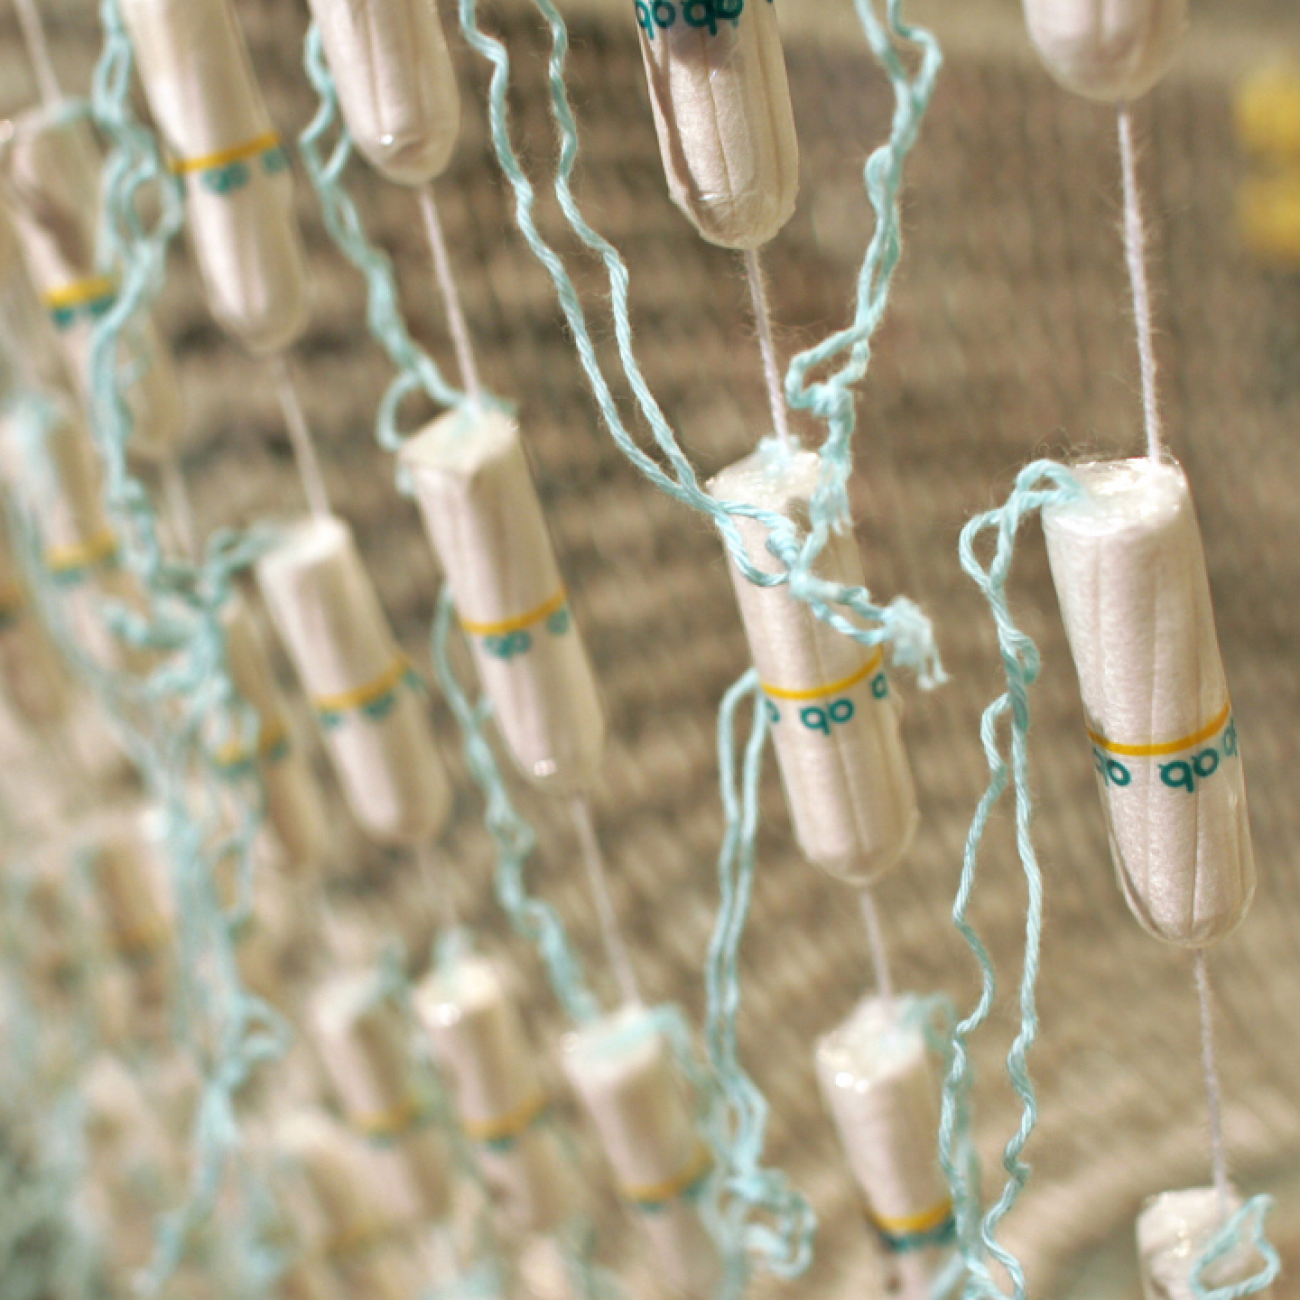 A chandelier made of hundreds of tampons entitled "The Bride" and created by Portuguese artist Joana Vasconcelos.